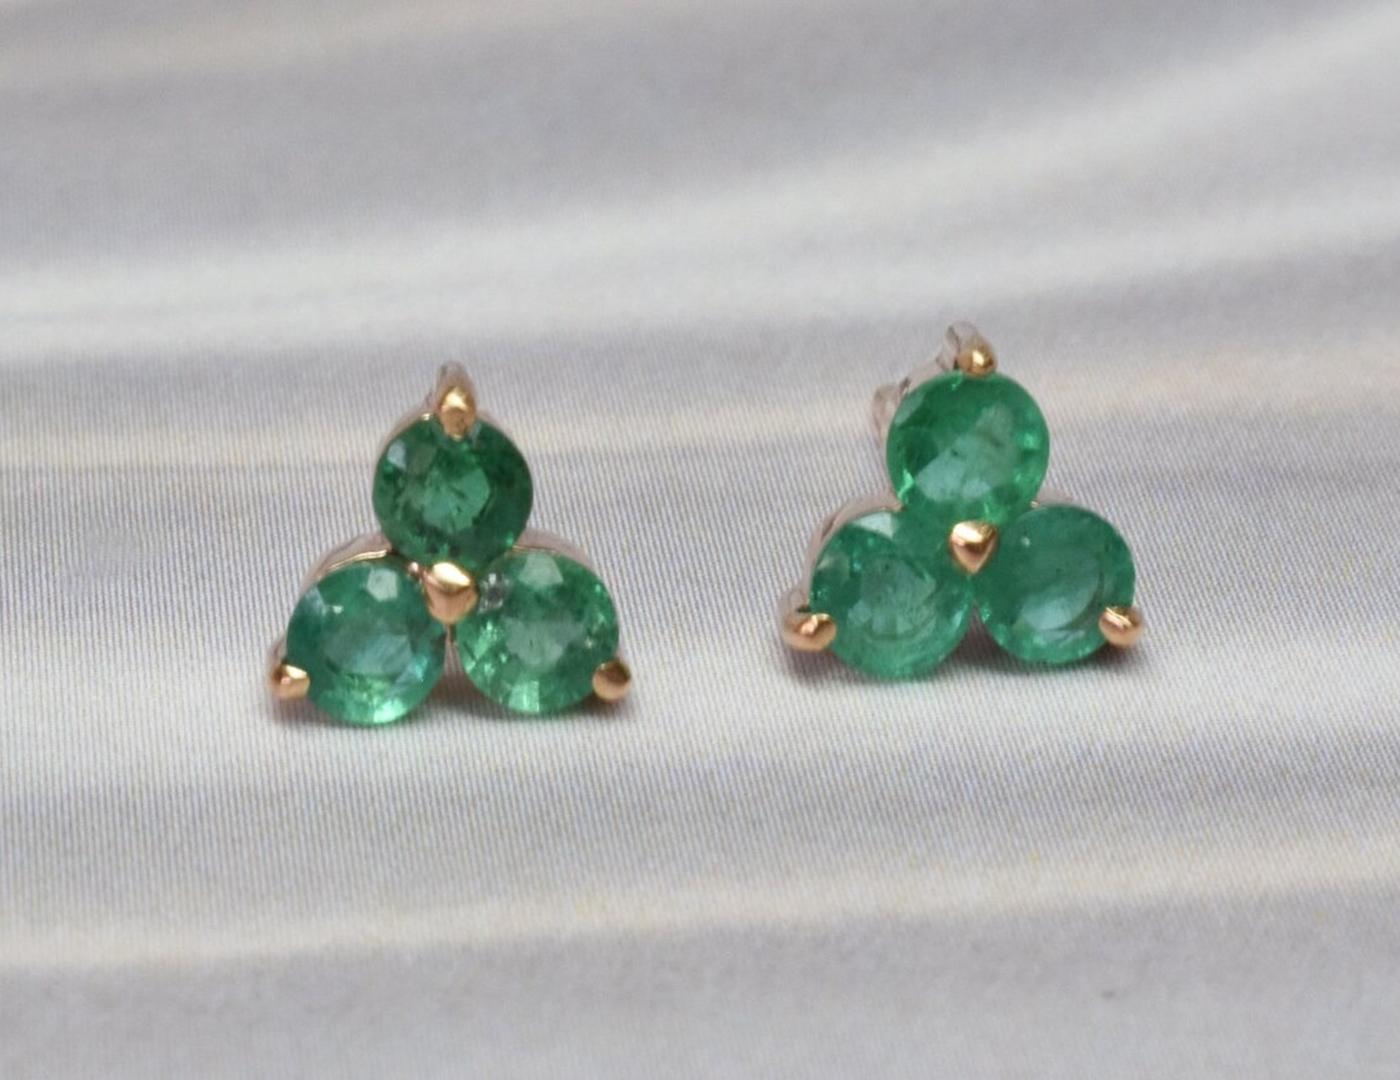 Emerald Floral Earrings in 18k Rose Gold, Yellow Gold, White Gold.

These Dainty Stud Earrings are made of 18k solid gold featuring shiny brilliant round cut natural diamonds set by master setter in our studio. Simple but unique, elegant and easy to